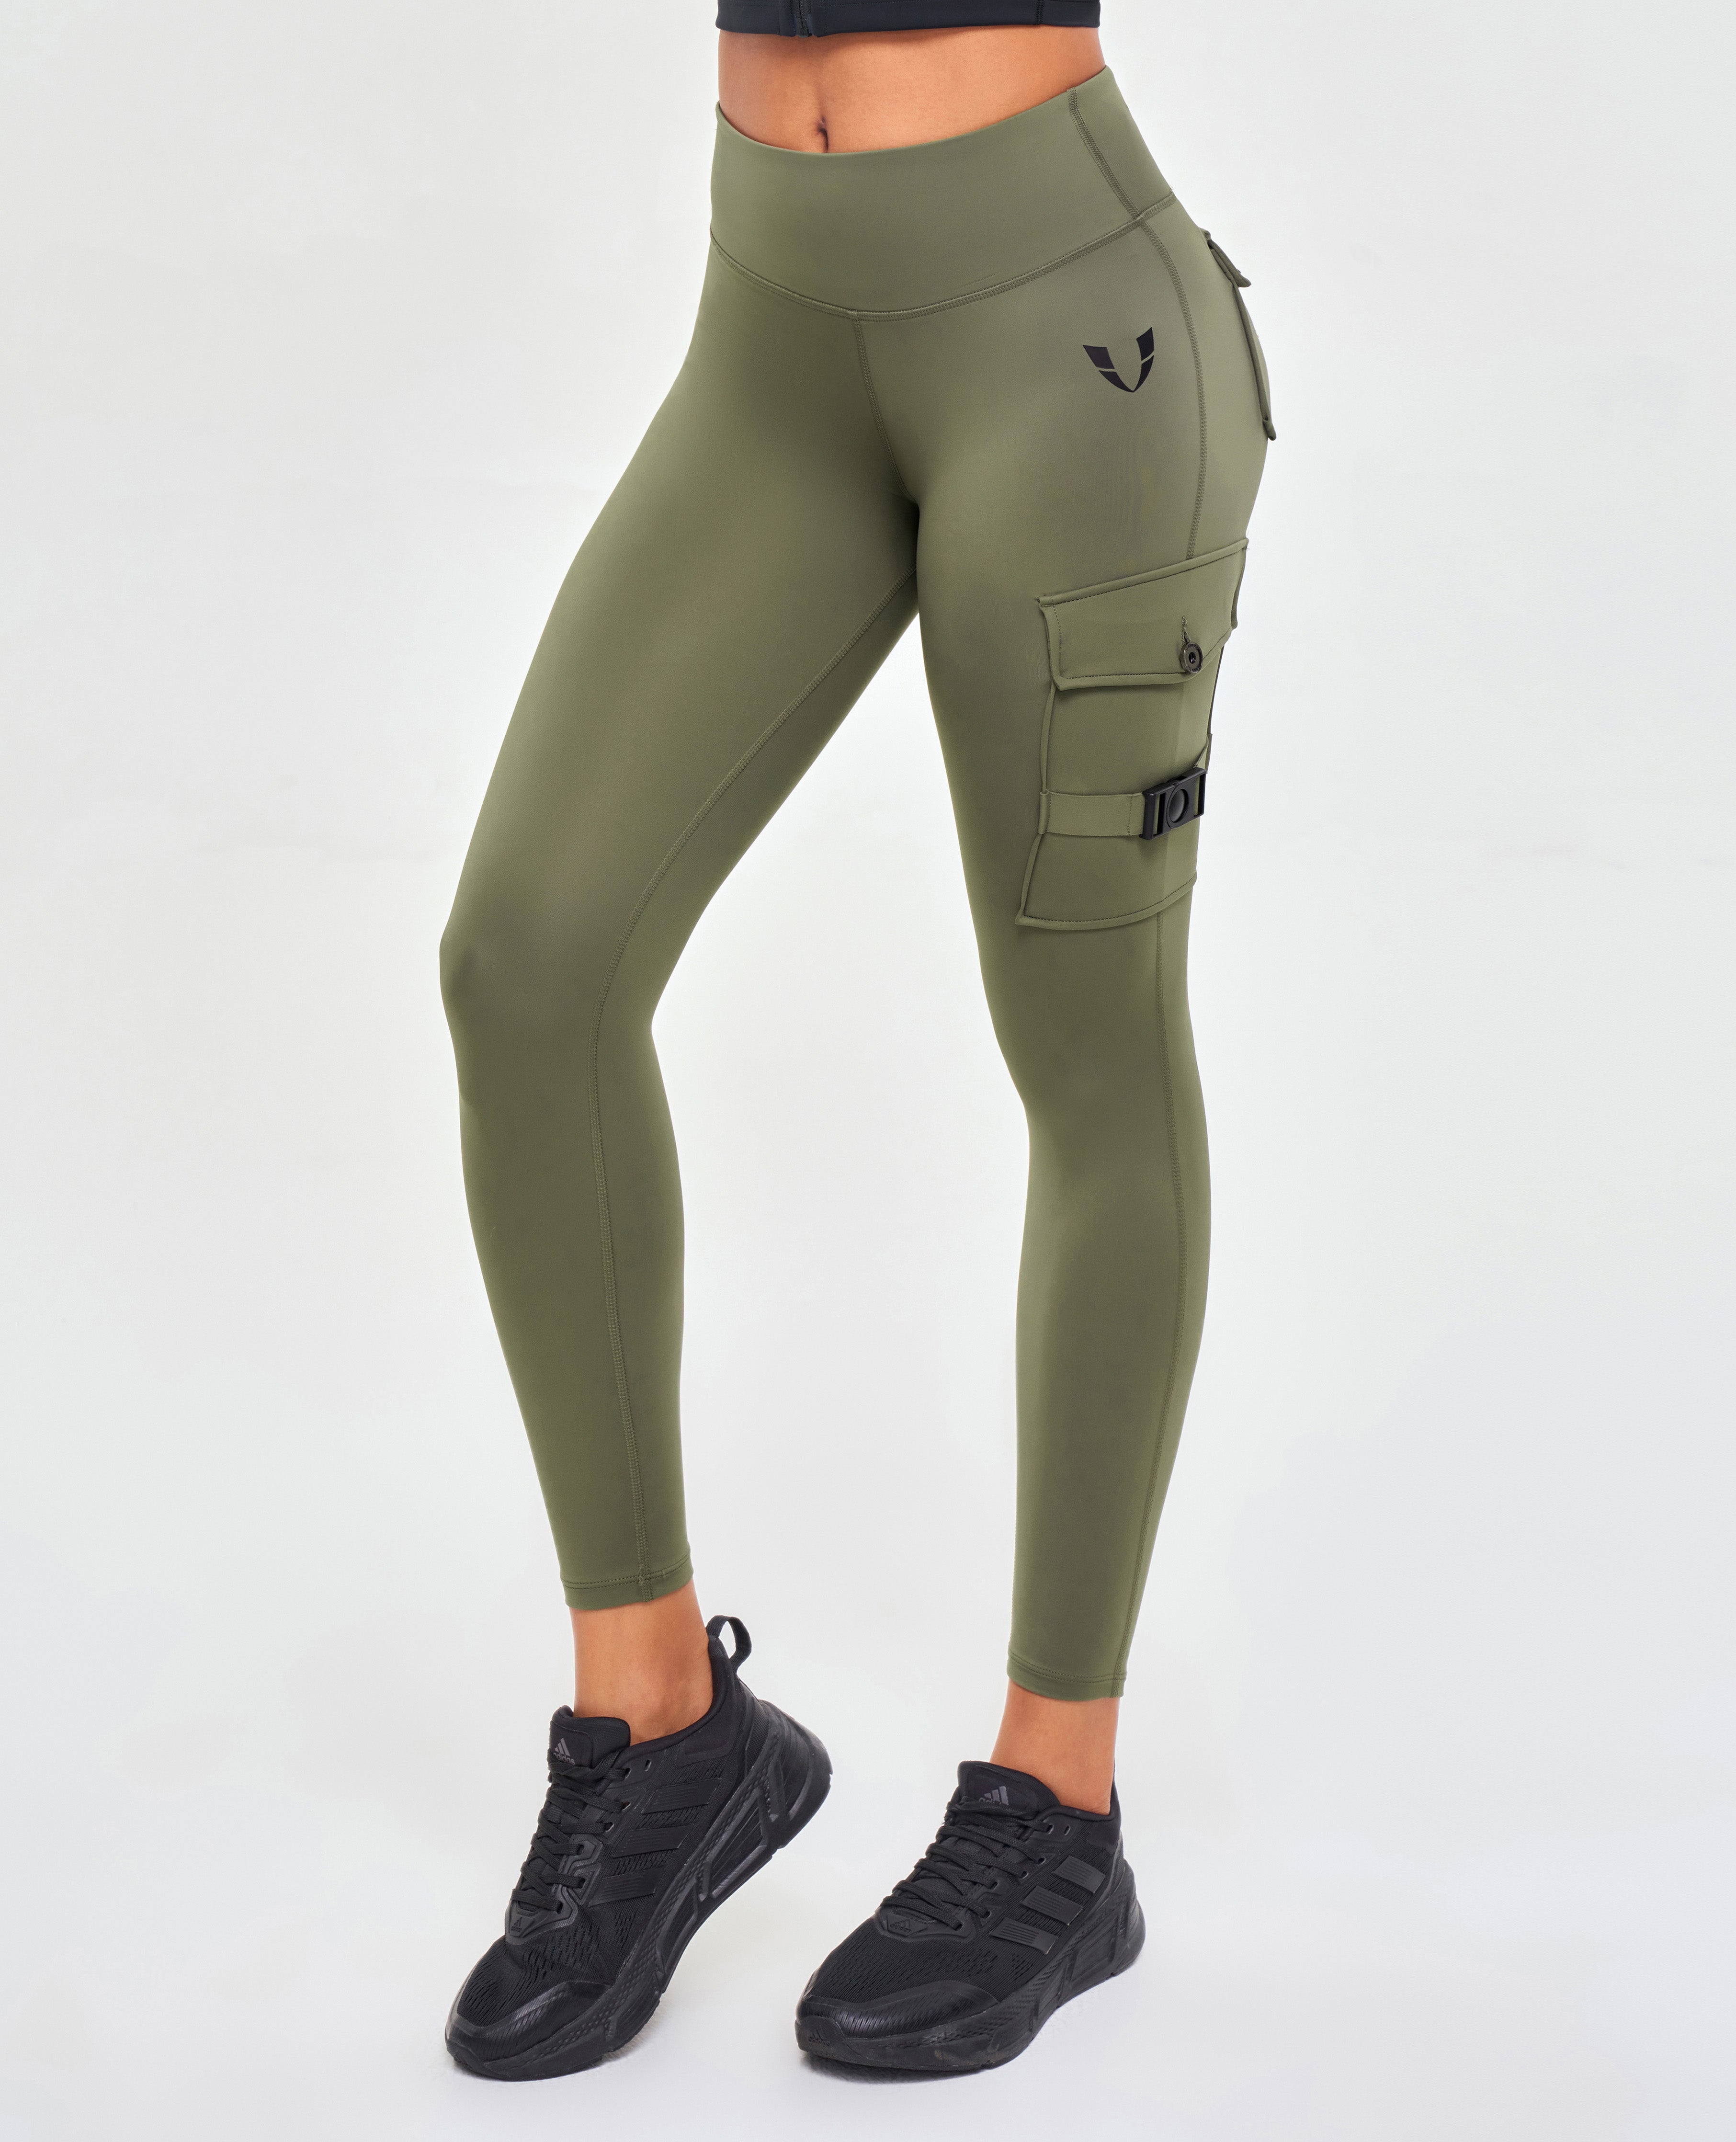 FIRM ABS - Wearing “Solo Cargo Leggings for my leg day